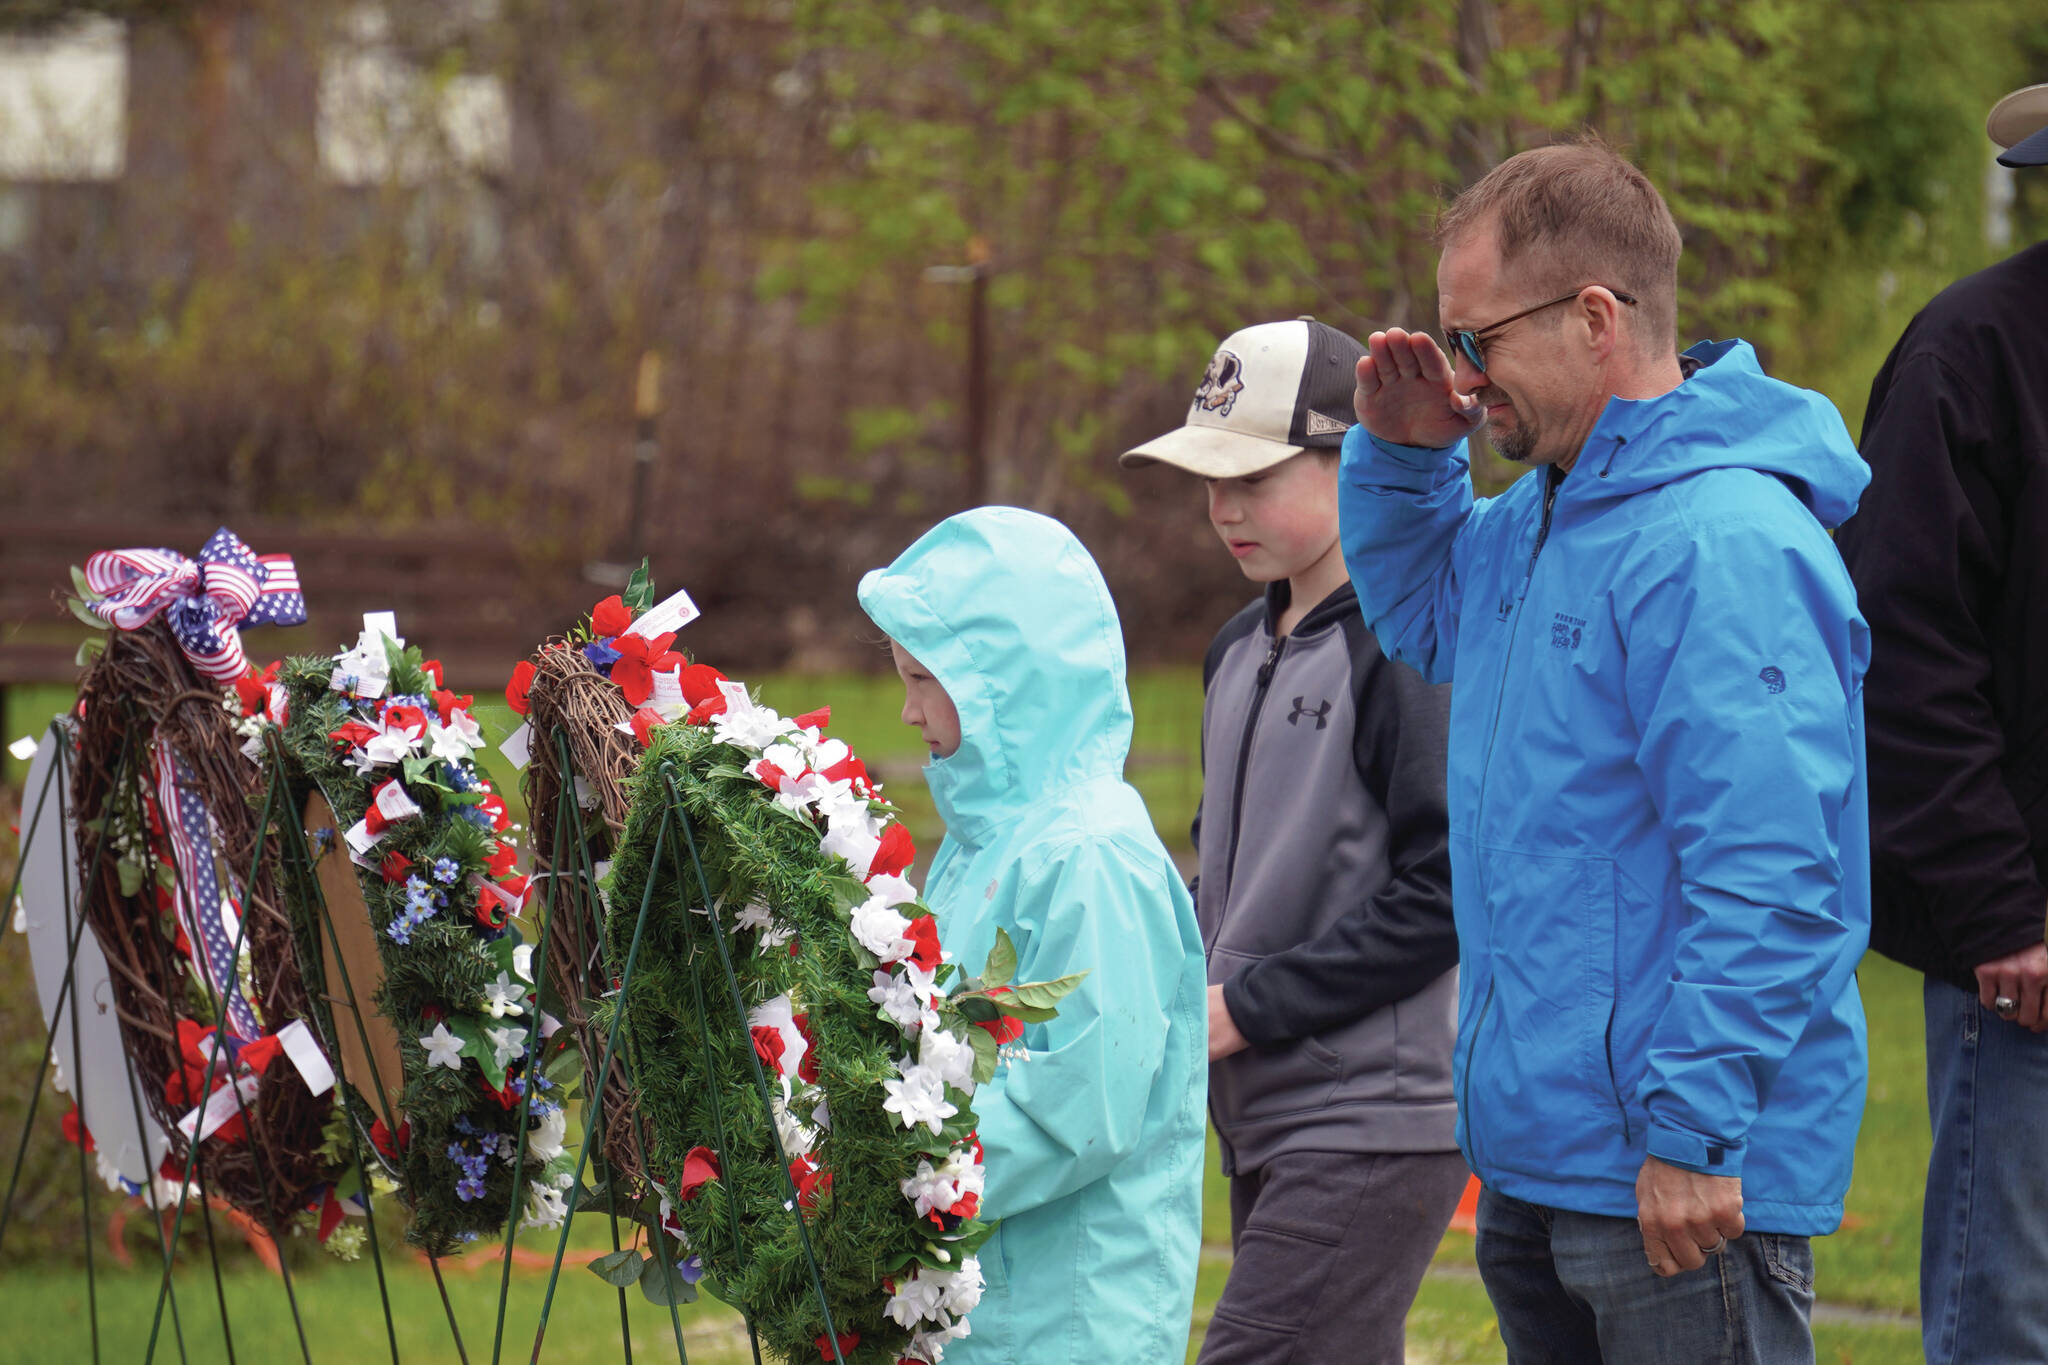 Poppies are affixed to wreaths during a Memorial Day ceremony at Leif Hanson Memorial Park in Kenai on Monday. (Jake Dye/Peninsula Clarion)